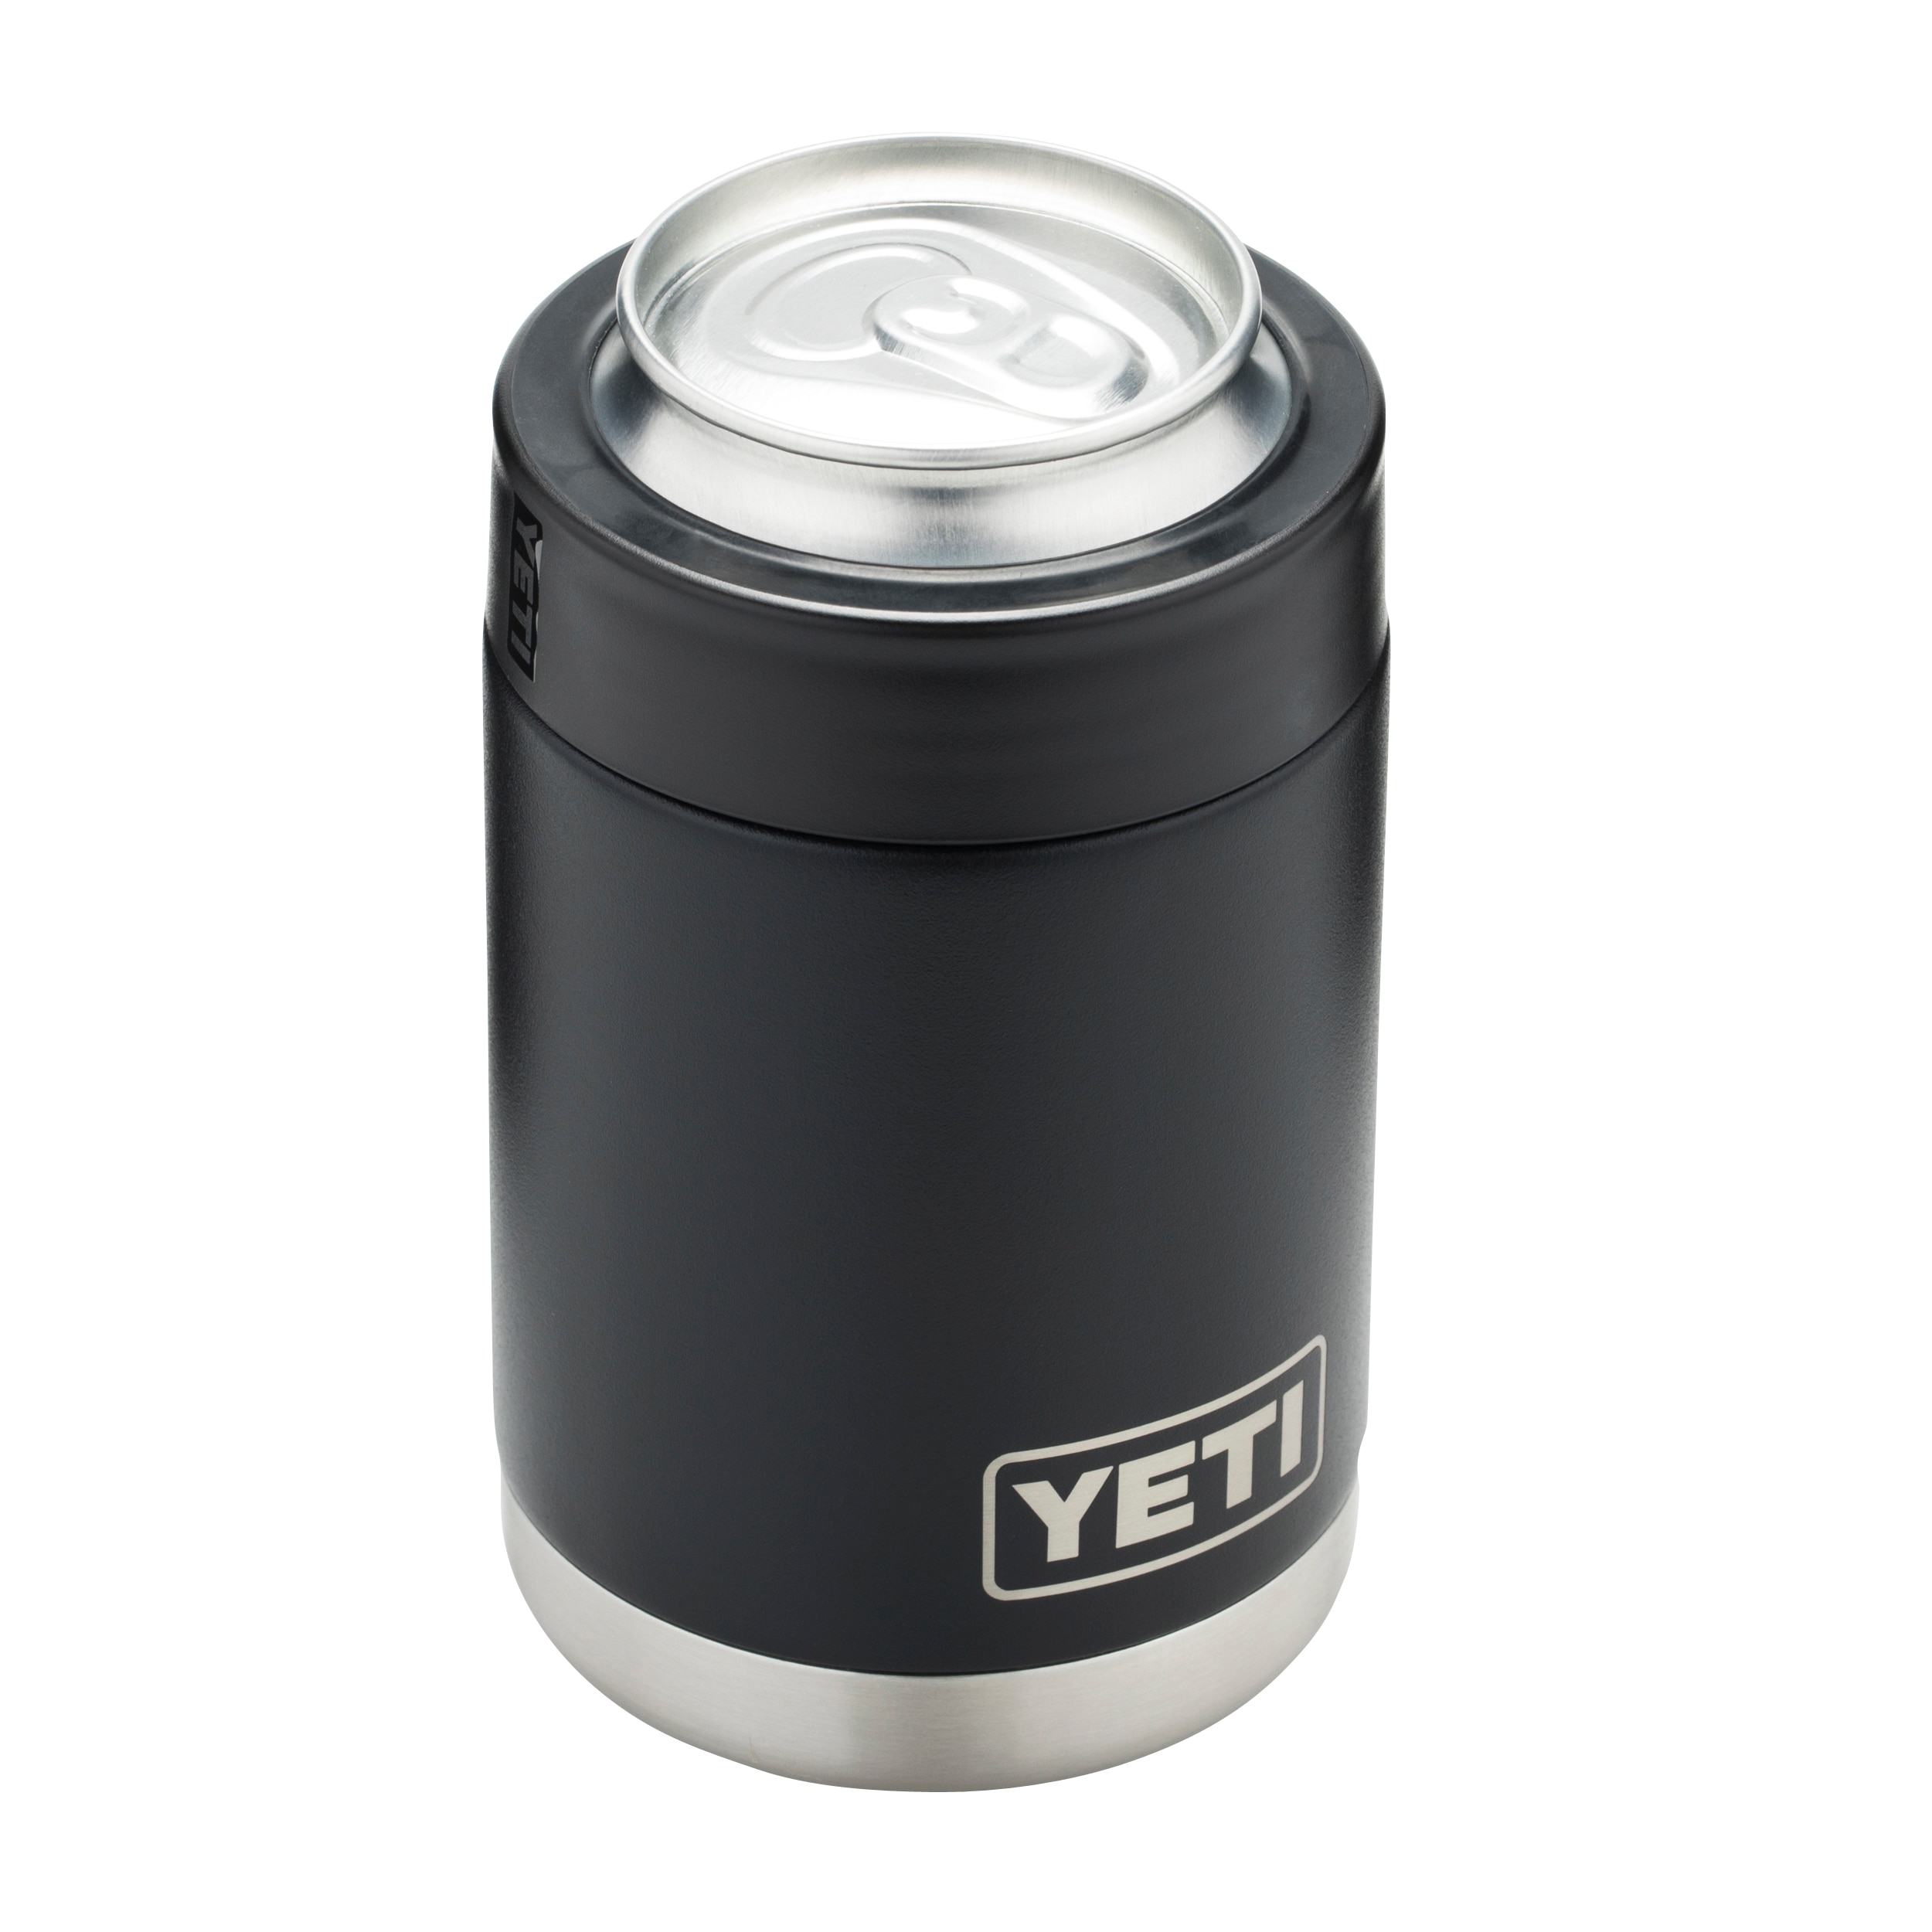 Yeti Life Hack: Beer bottles fit perfectly in the 12oz Colster Can